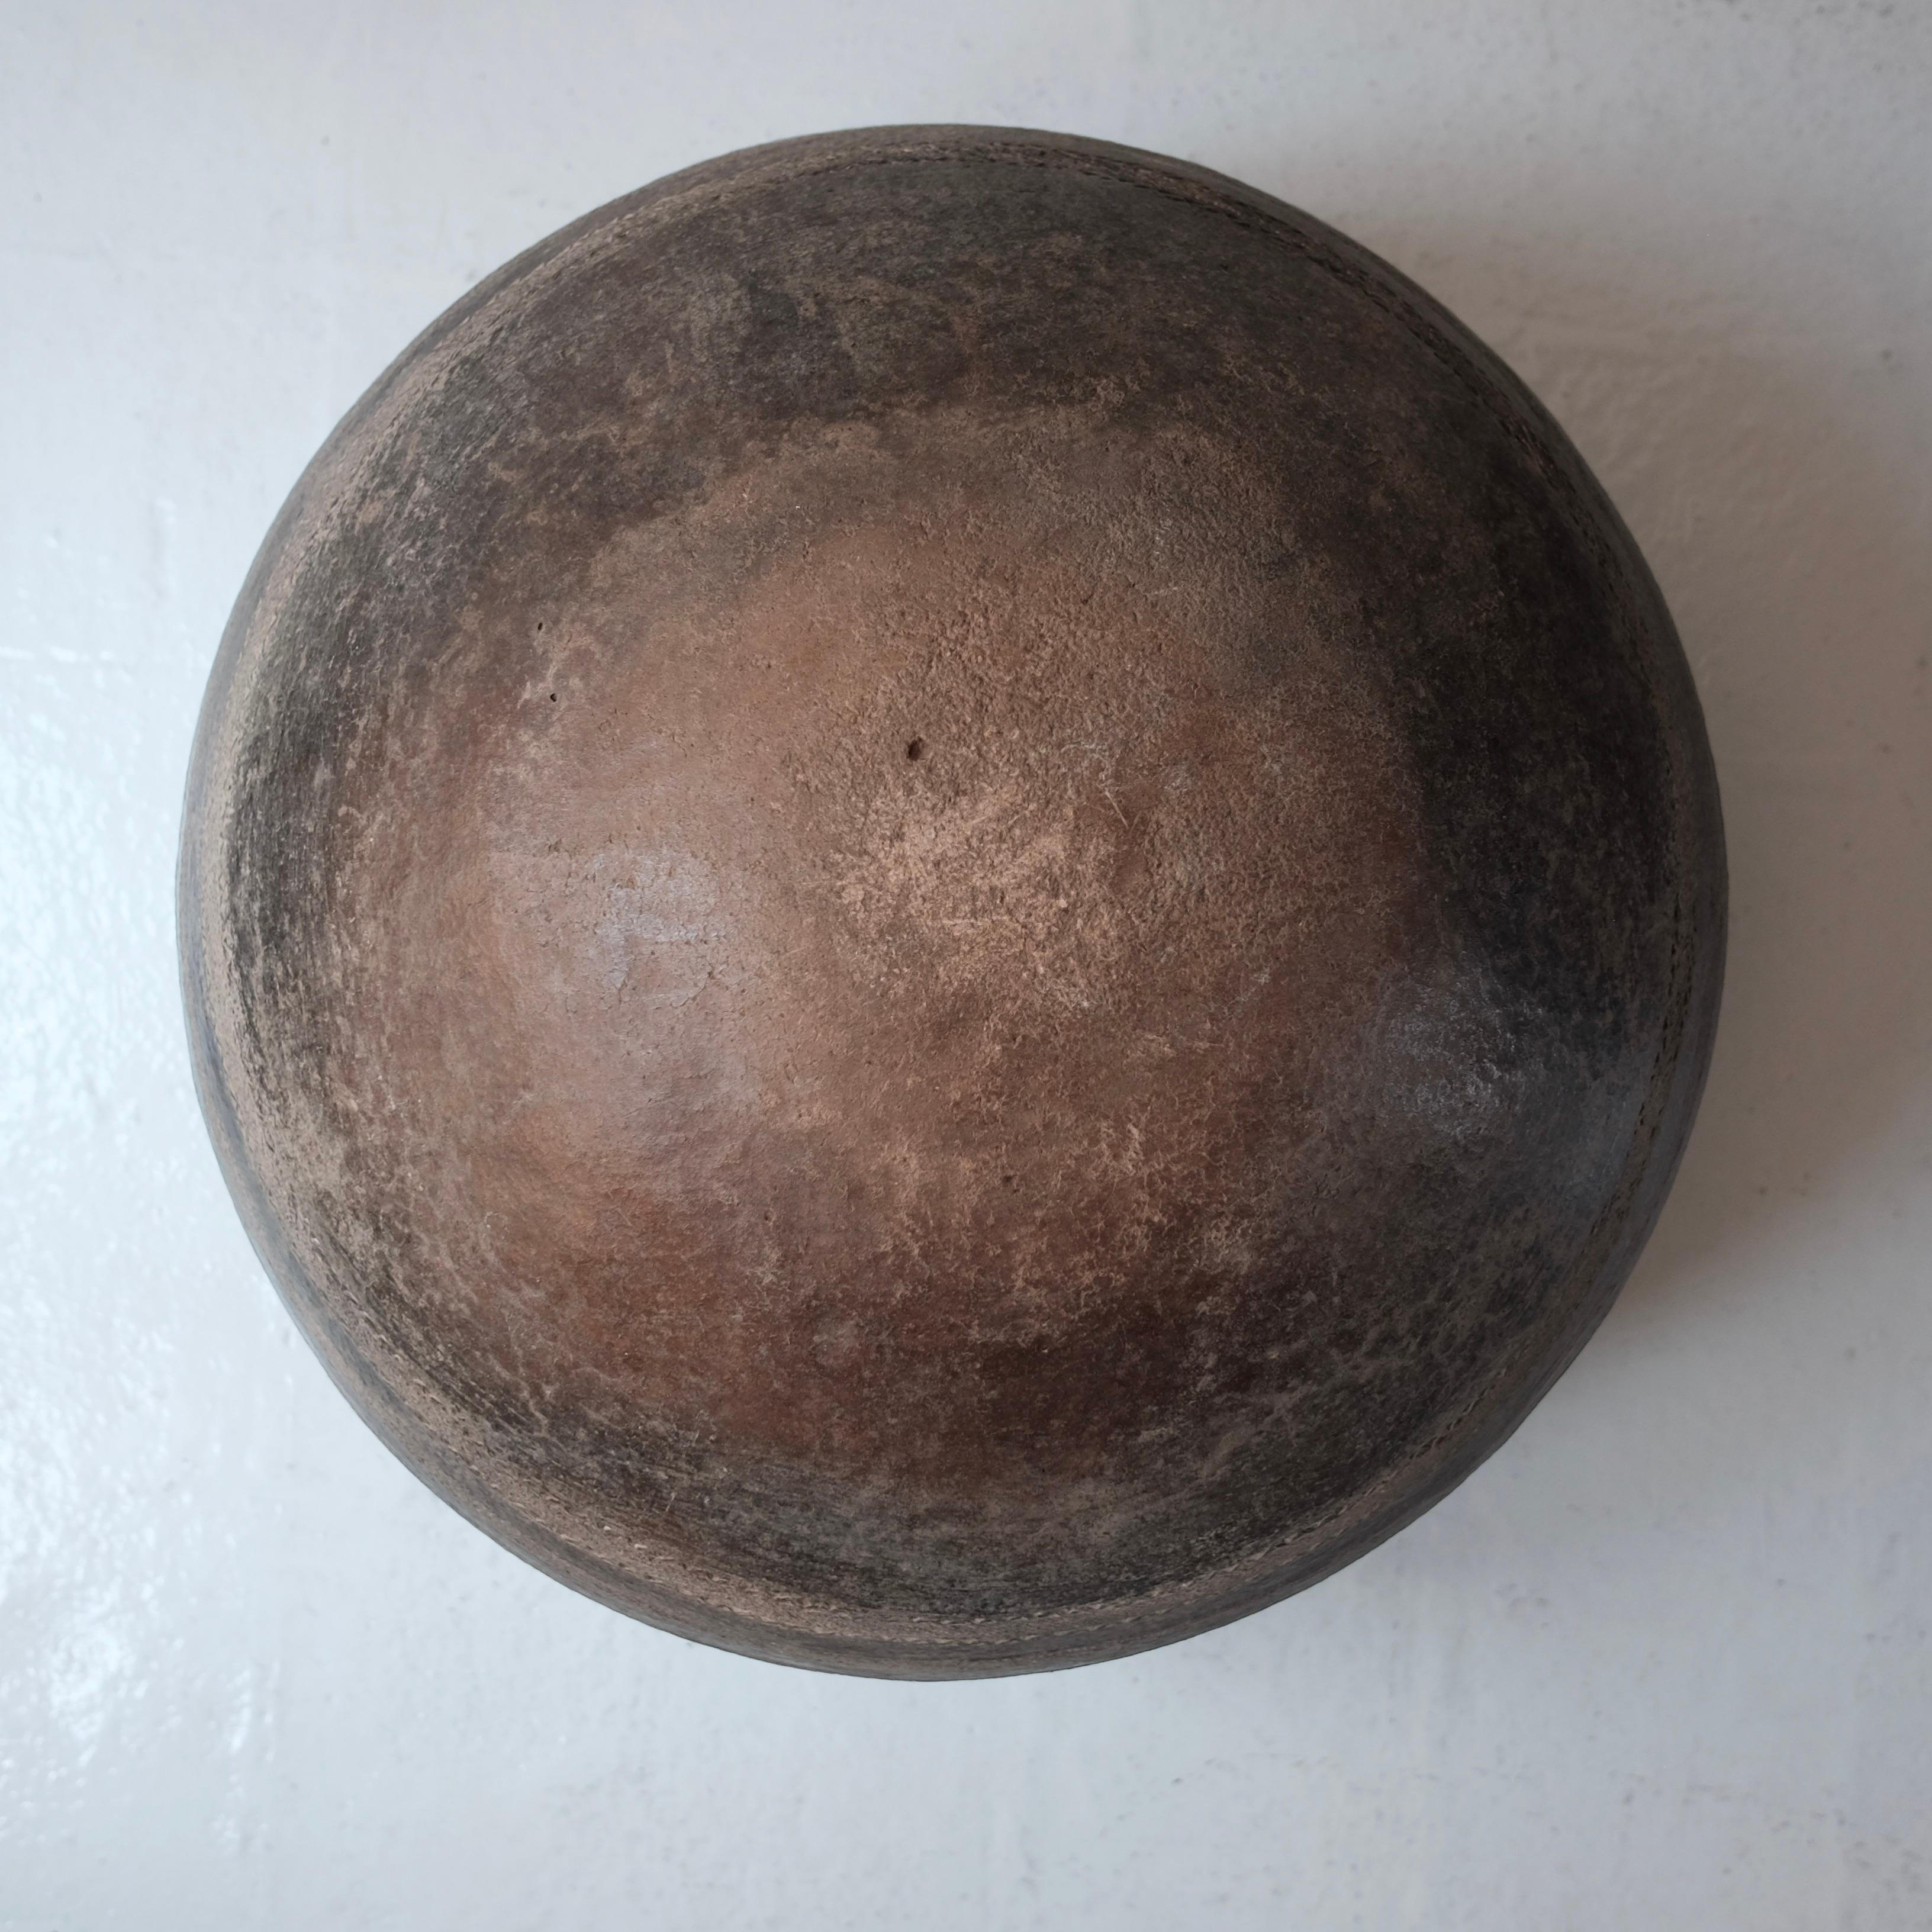 Maconde Water Pot from Mozambique, Africa 3